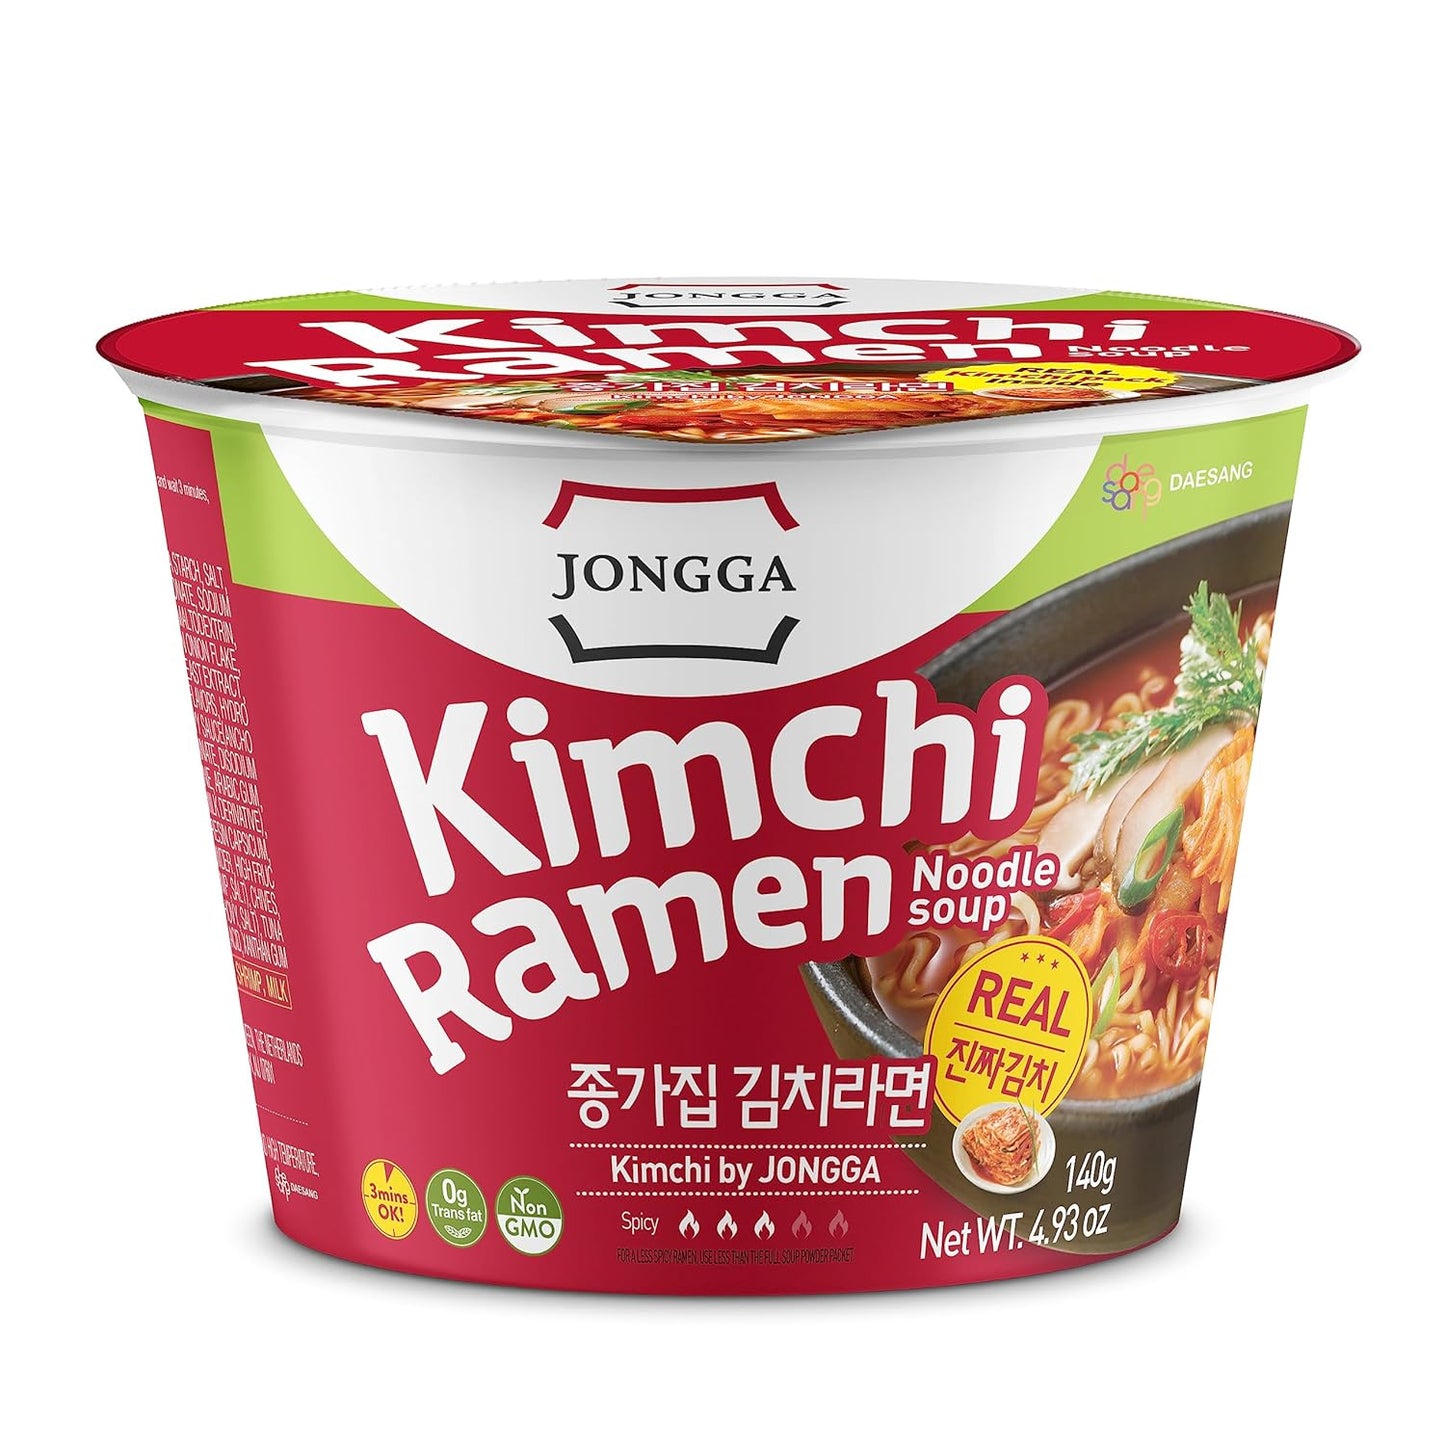 JONGGA Kimchi Ramen with Real Kimchi, Korean Instant Spicy Cup Noodle, Best Tasting Bowl Soup, Hot and Savory Broth Perfect for Hangover, Made with Authentic Kimchi, Ready to Eat, 0 Trans-Fat, Non-GMO, Ready in 3 Min (Pack of 6)